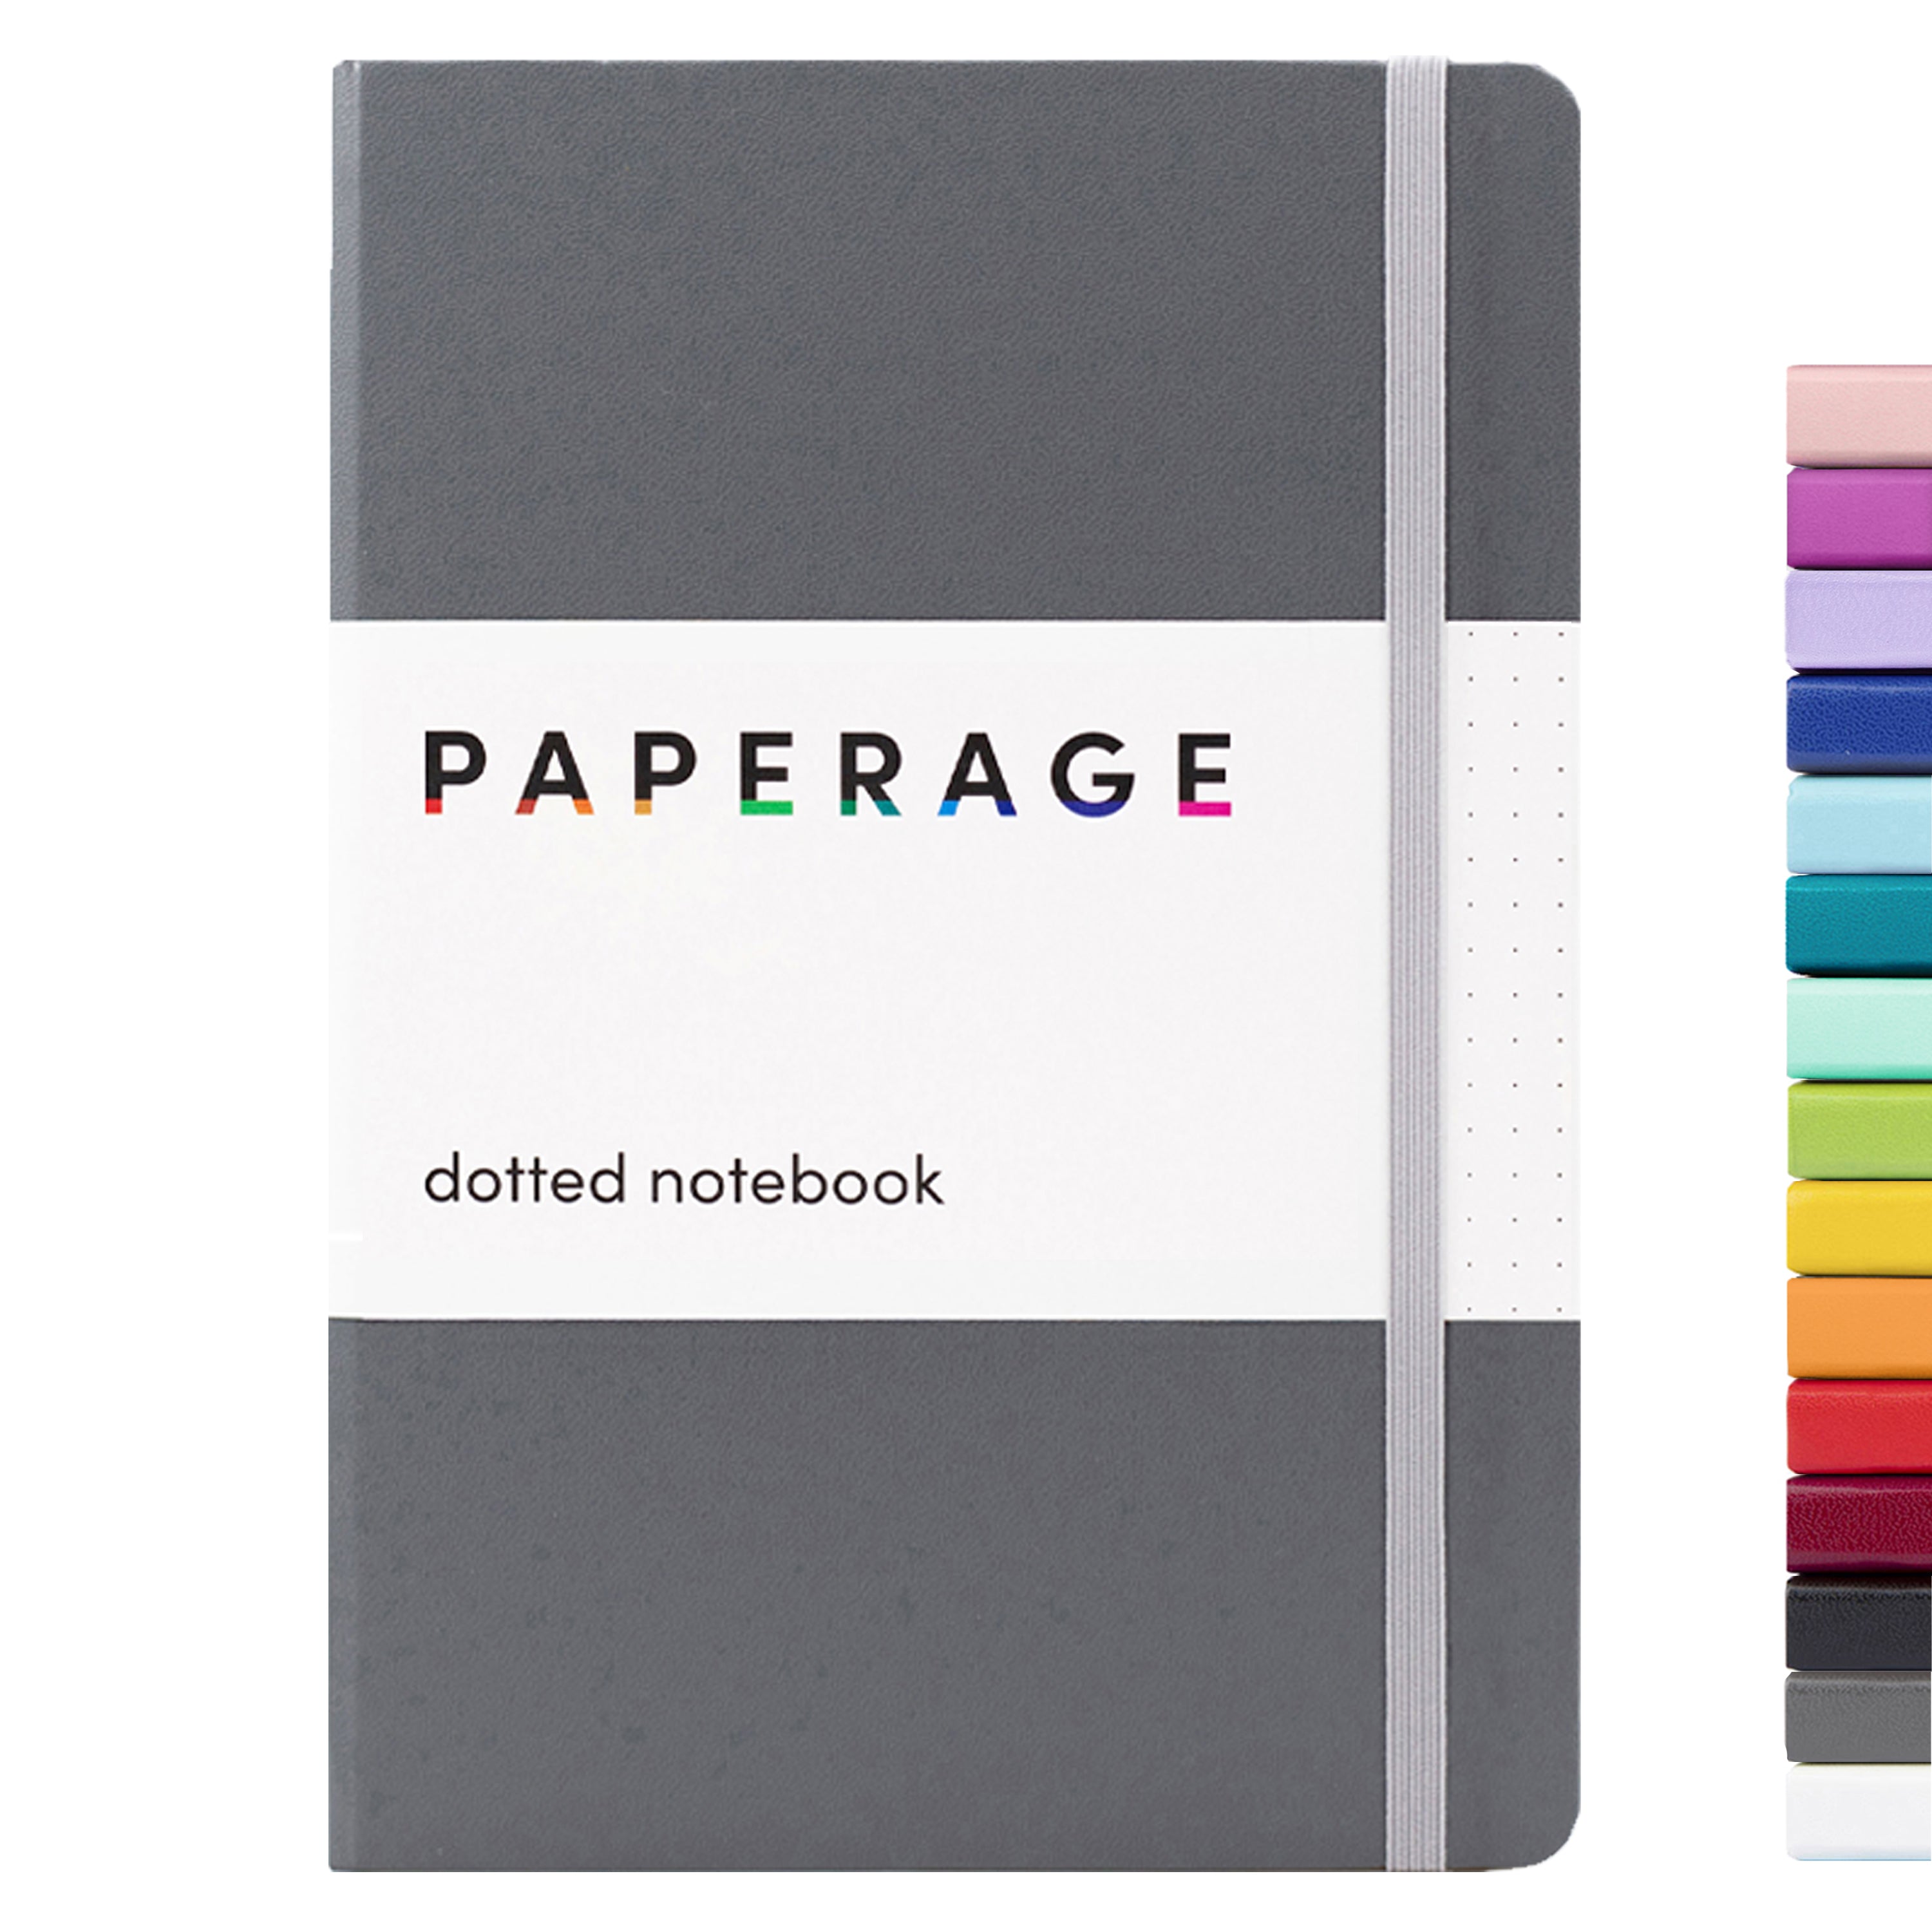 Paperage 80016 PAPERAGE Dotted Journal Notebook, (White), 160 Pages, Medium  5.7 inches x 8 inches - 100 gsm Thick Paper, Hardcover